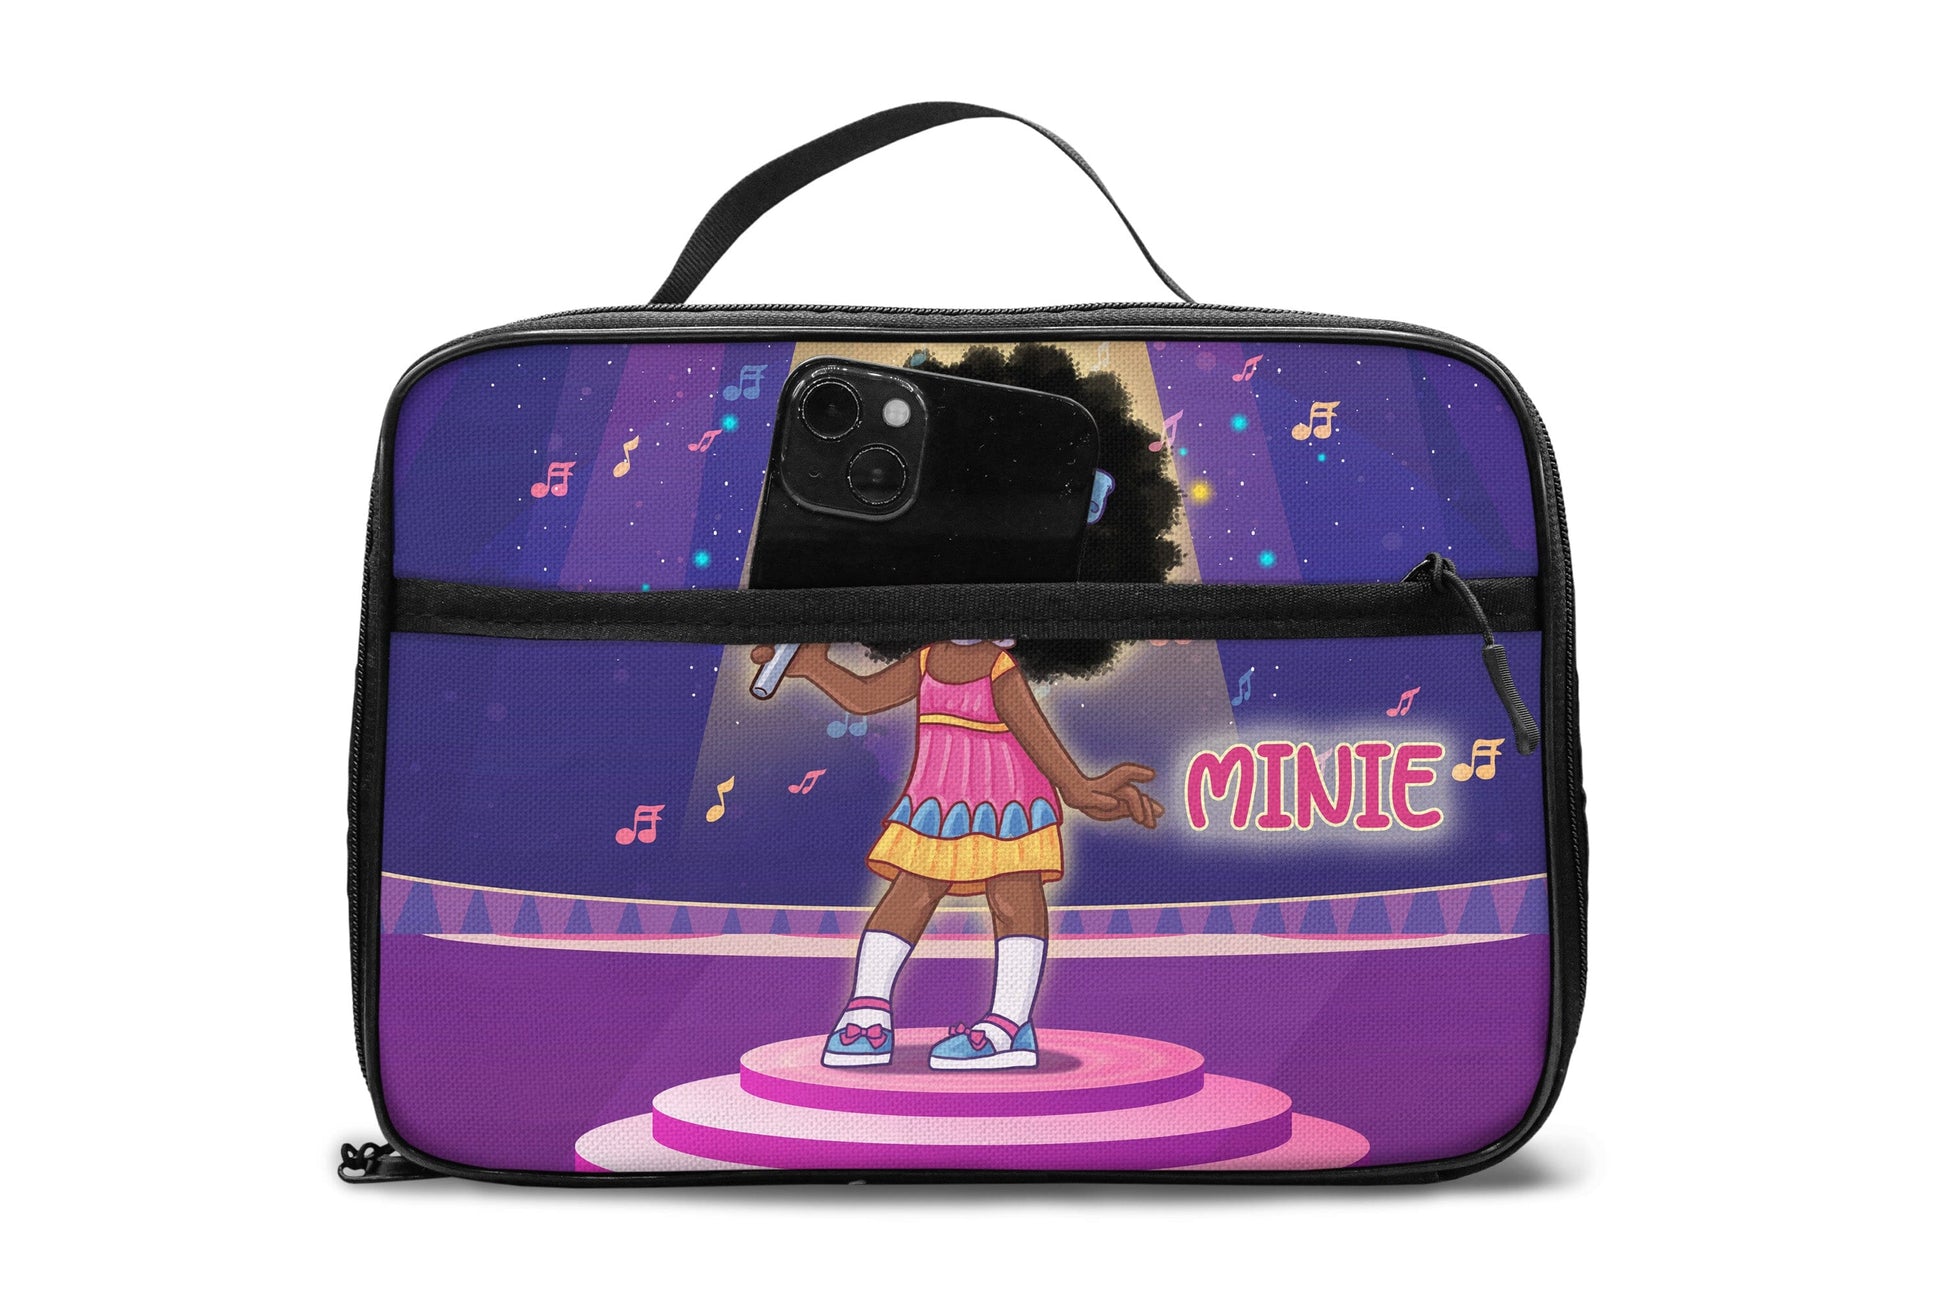 Personalized Little Afro Singer Lunch Bag For Kids (Without Containers) Kid Lunch bag Tianci 